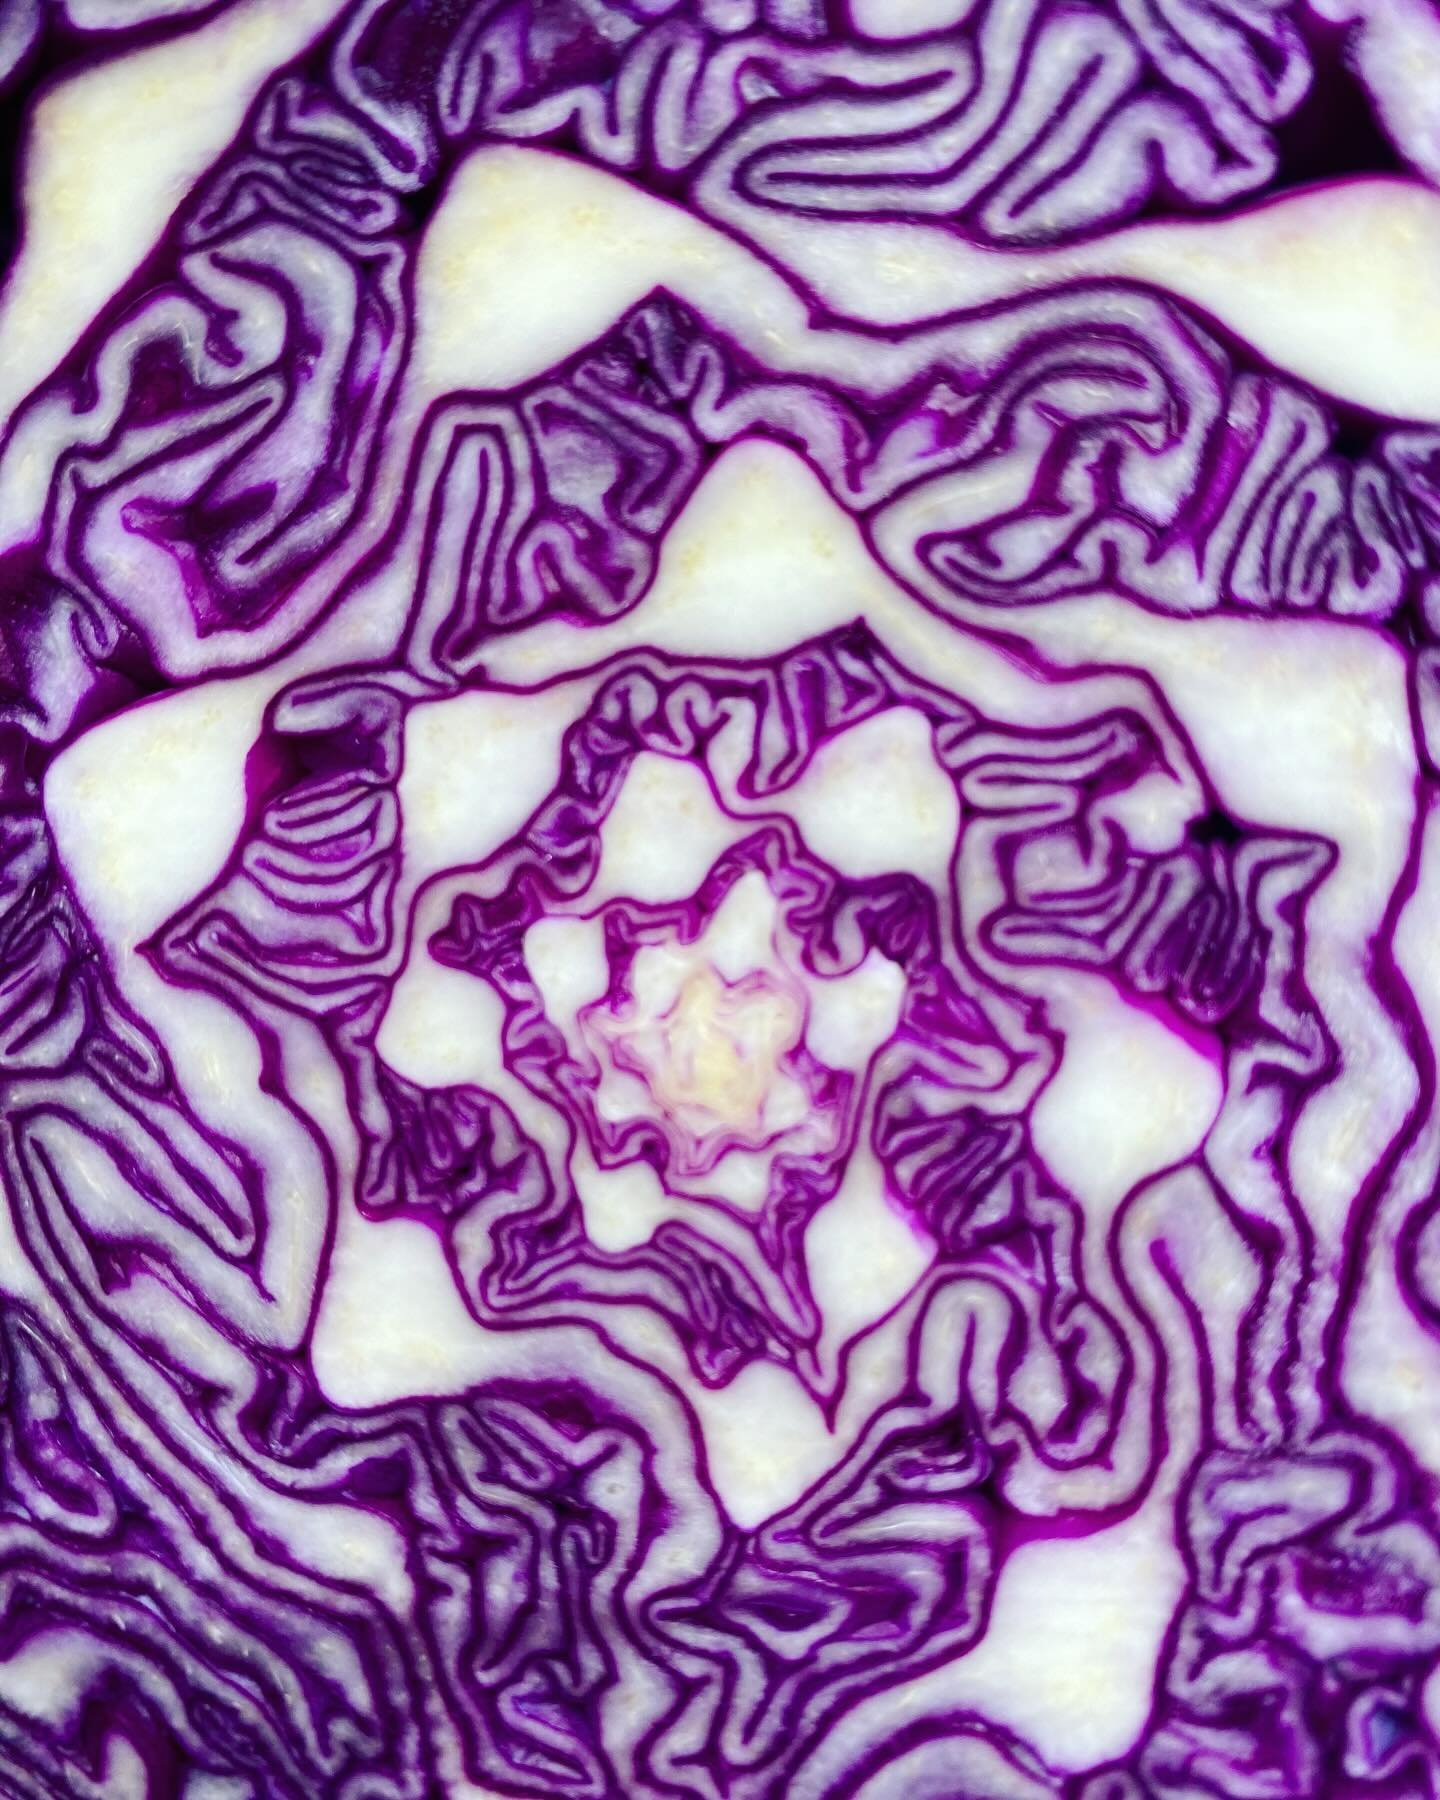 Ummm&hellip; let&rsquo;s take a weird little moment together to marvel at the beautiful, starburst inside of the humble Red Cabbage? 😆

Have a beautiful weekend, pals&hellip;